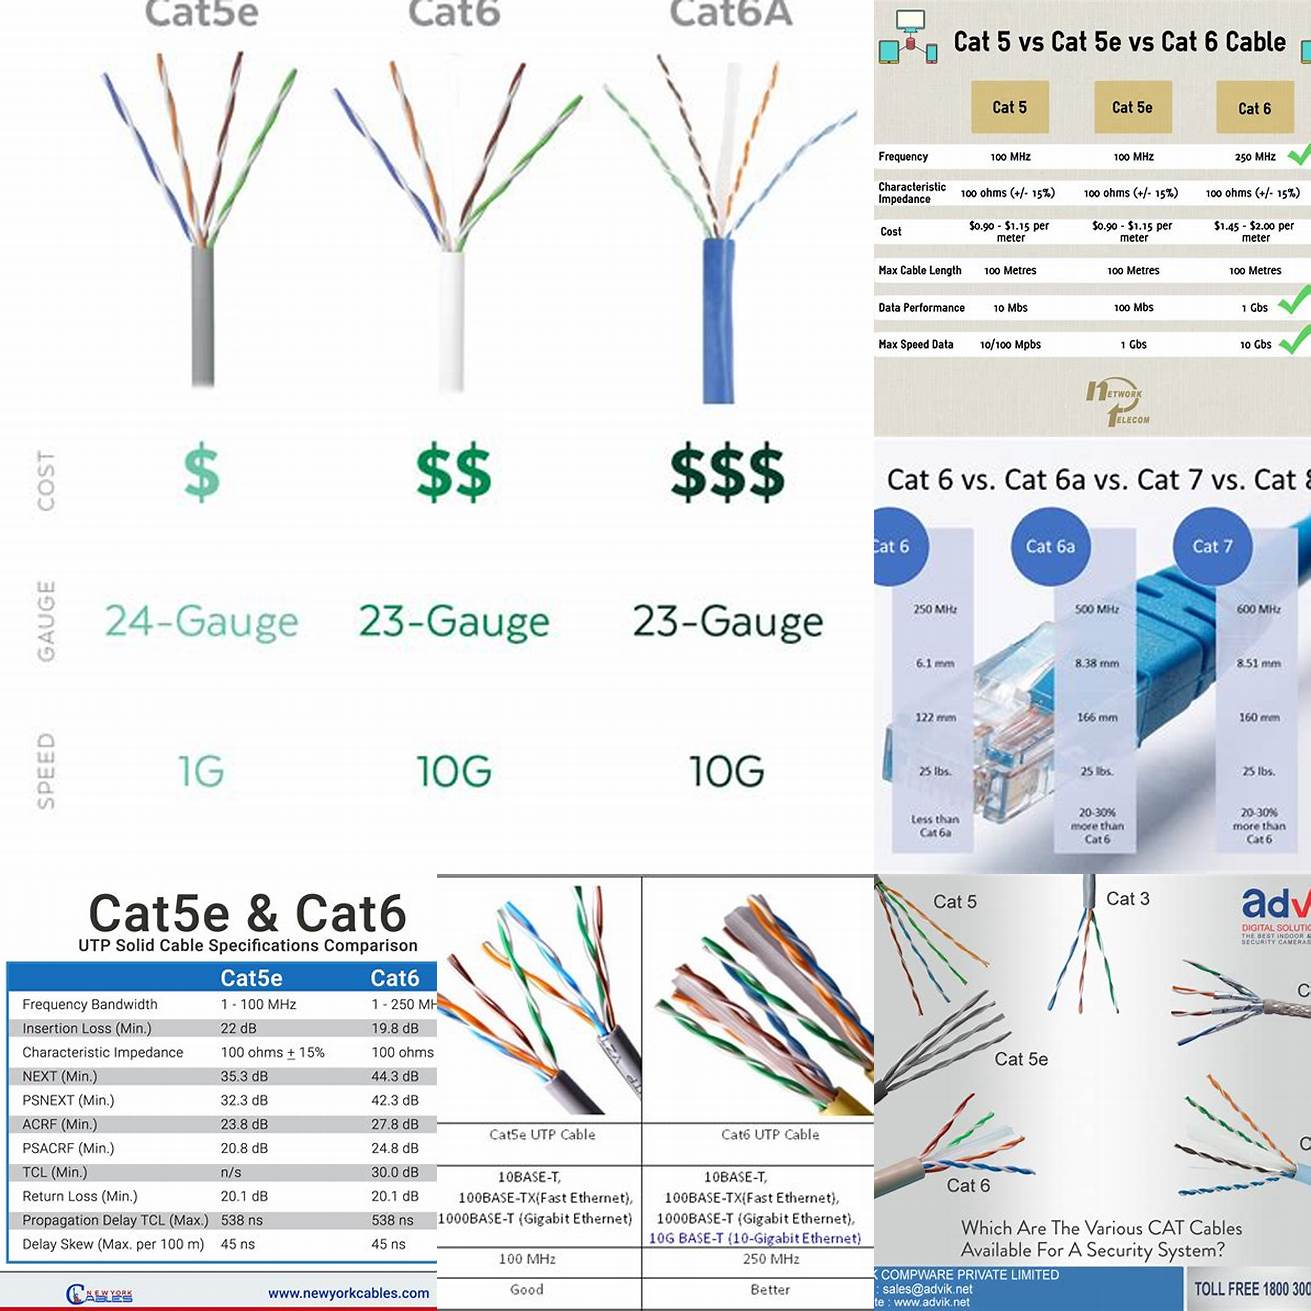 Comparison chart of Cat 5 and Cat 6 cables